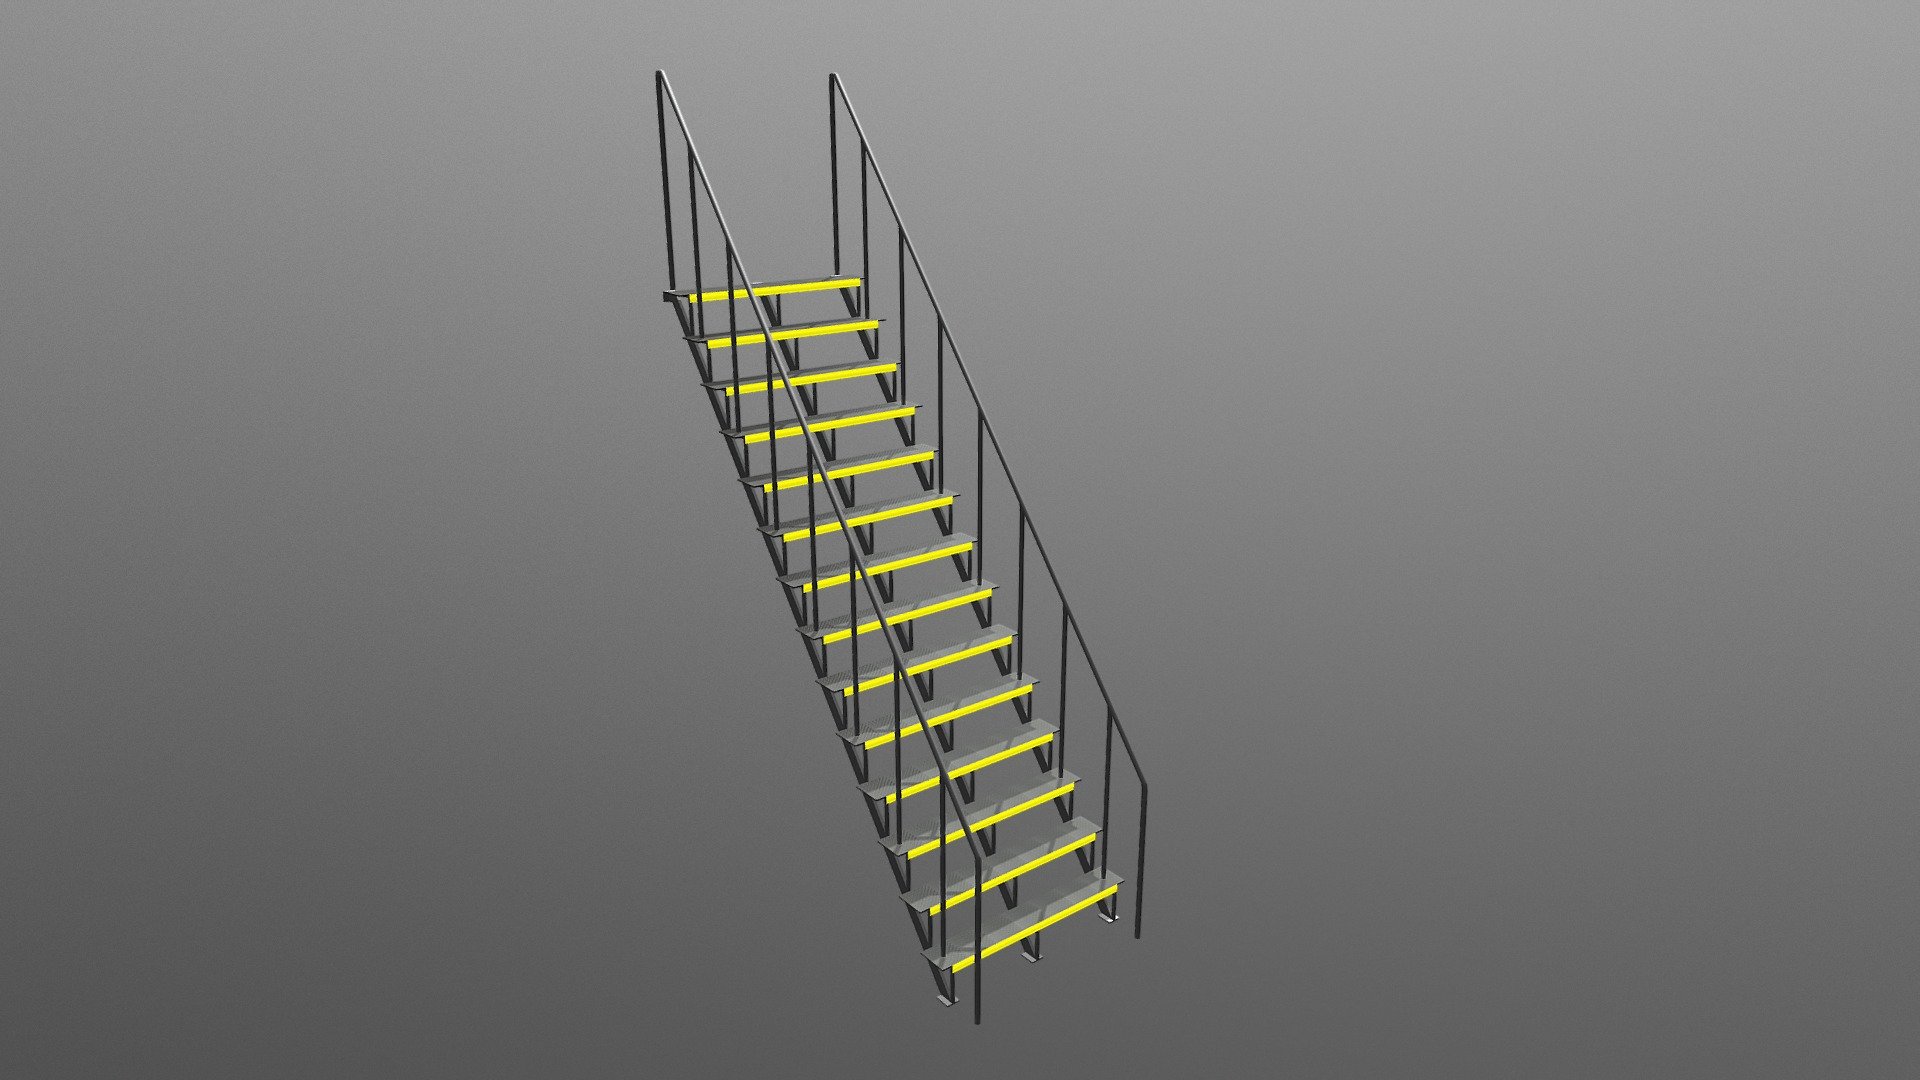 A 9 foot tall, steep stair-ladder with a 52 degree incline, 2' by 6